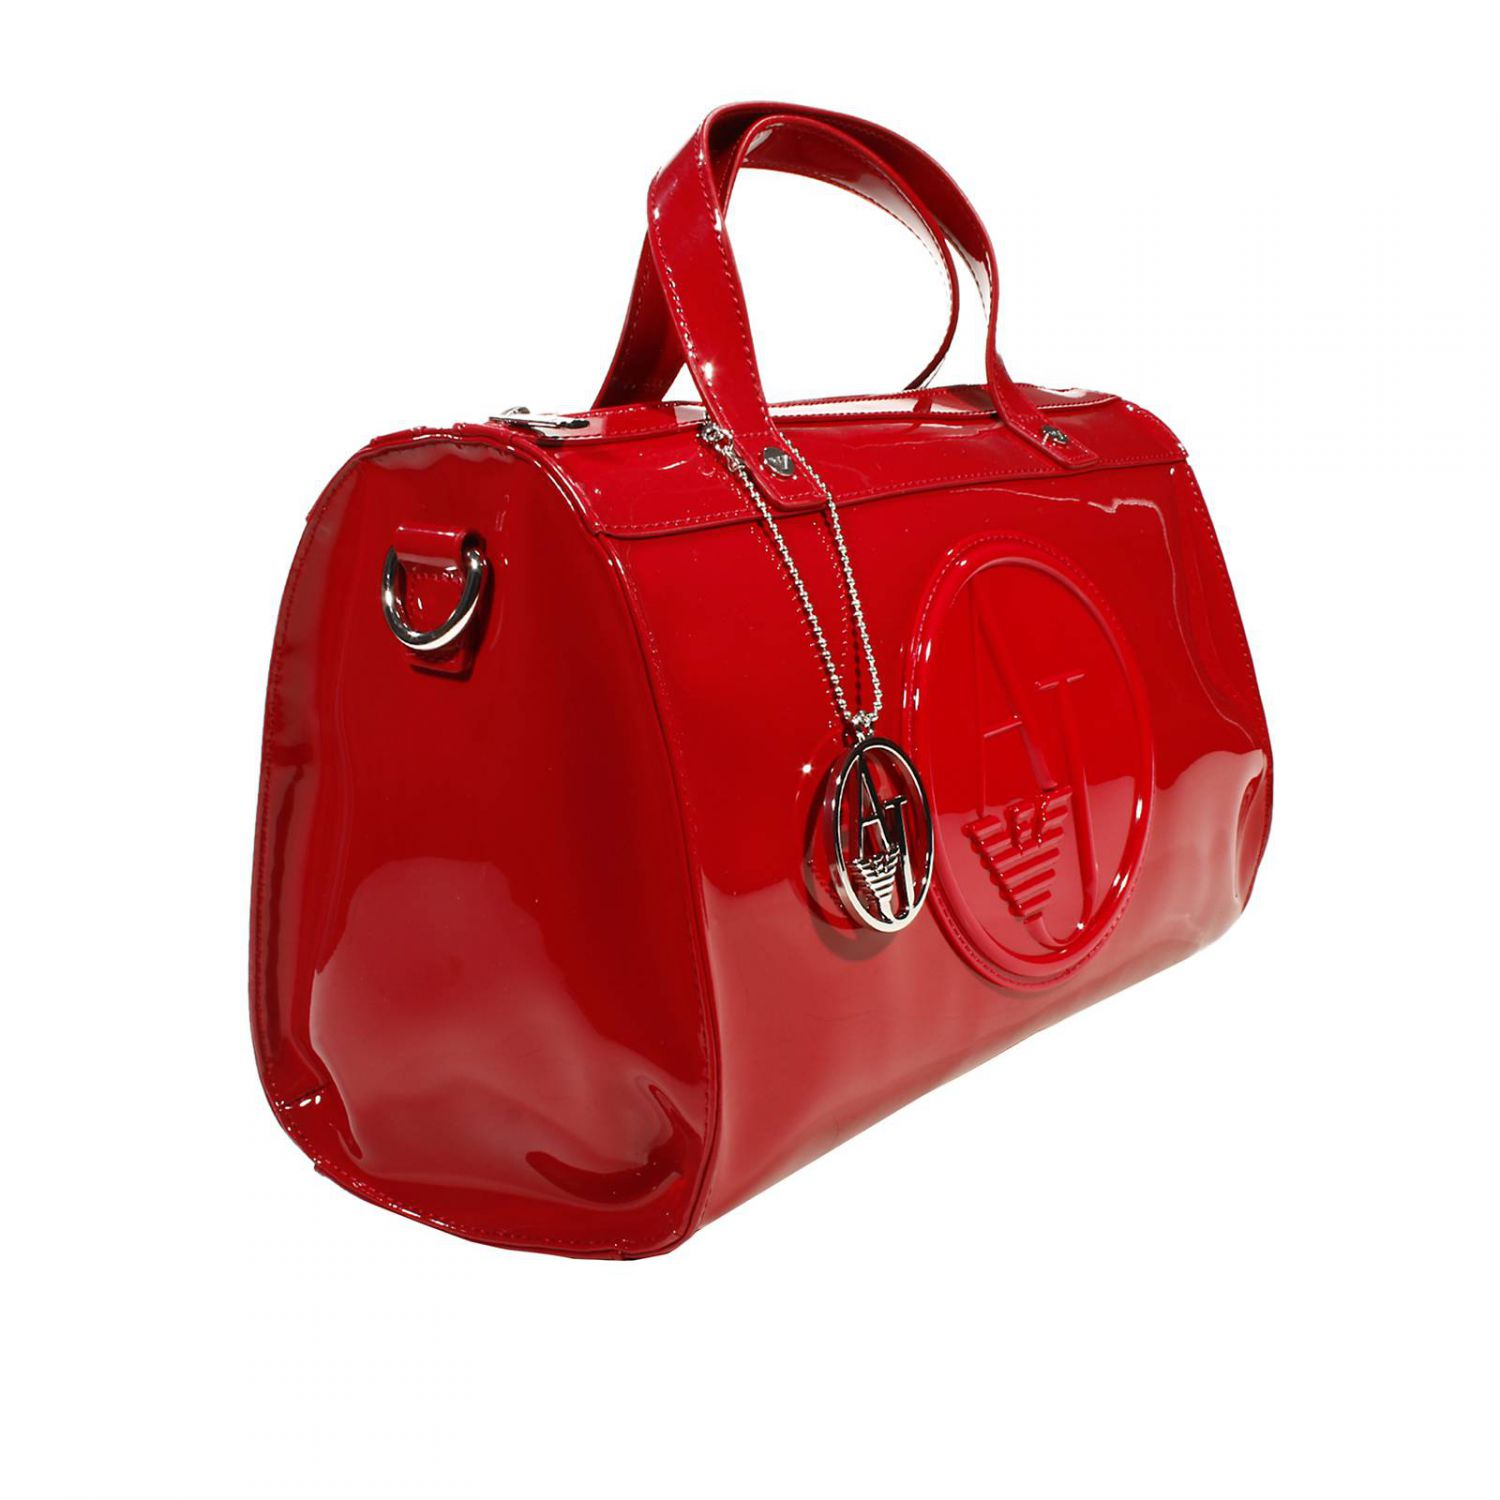 Armani jeans Handbag Trunk Bag Patent Leather 31X25X16 Cm in Red (Red out of stock) | Lyst